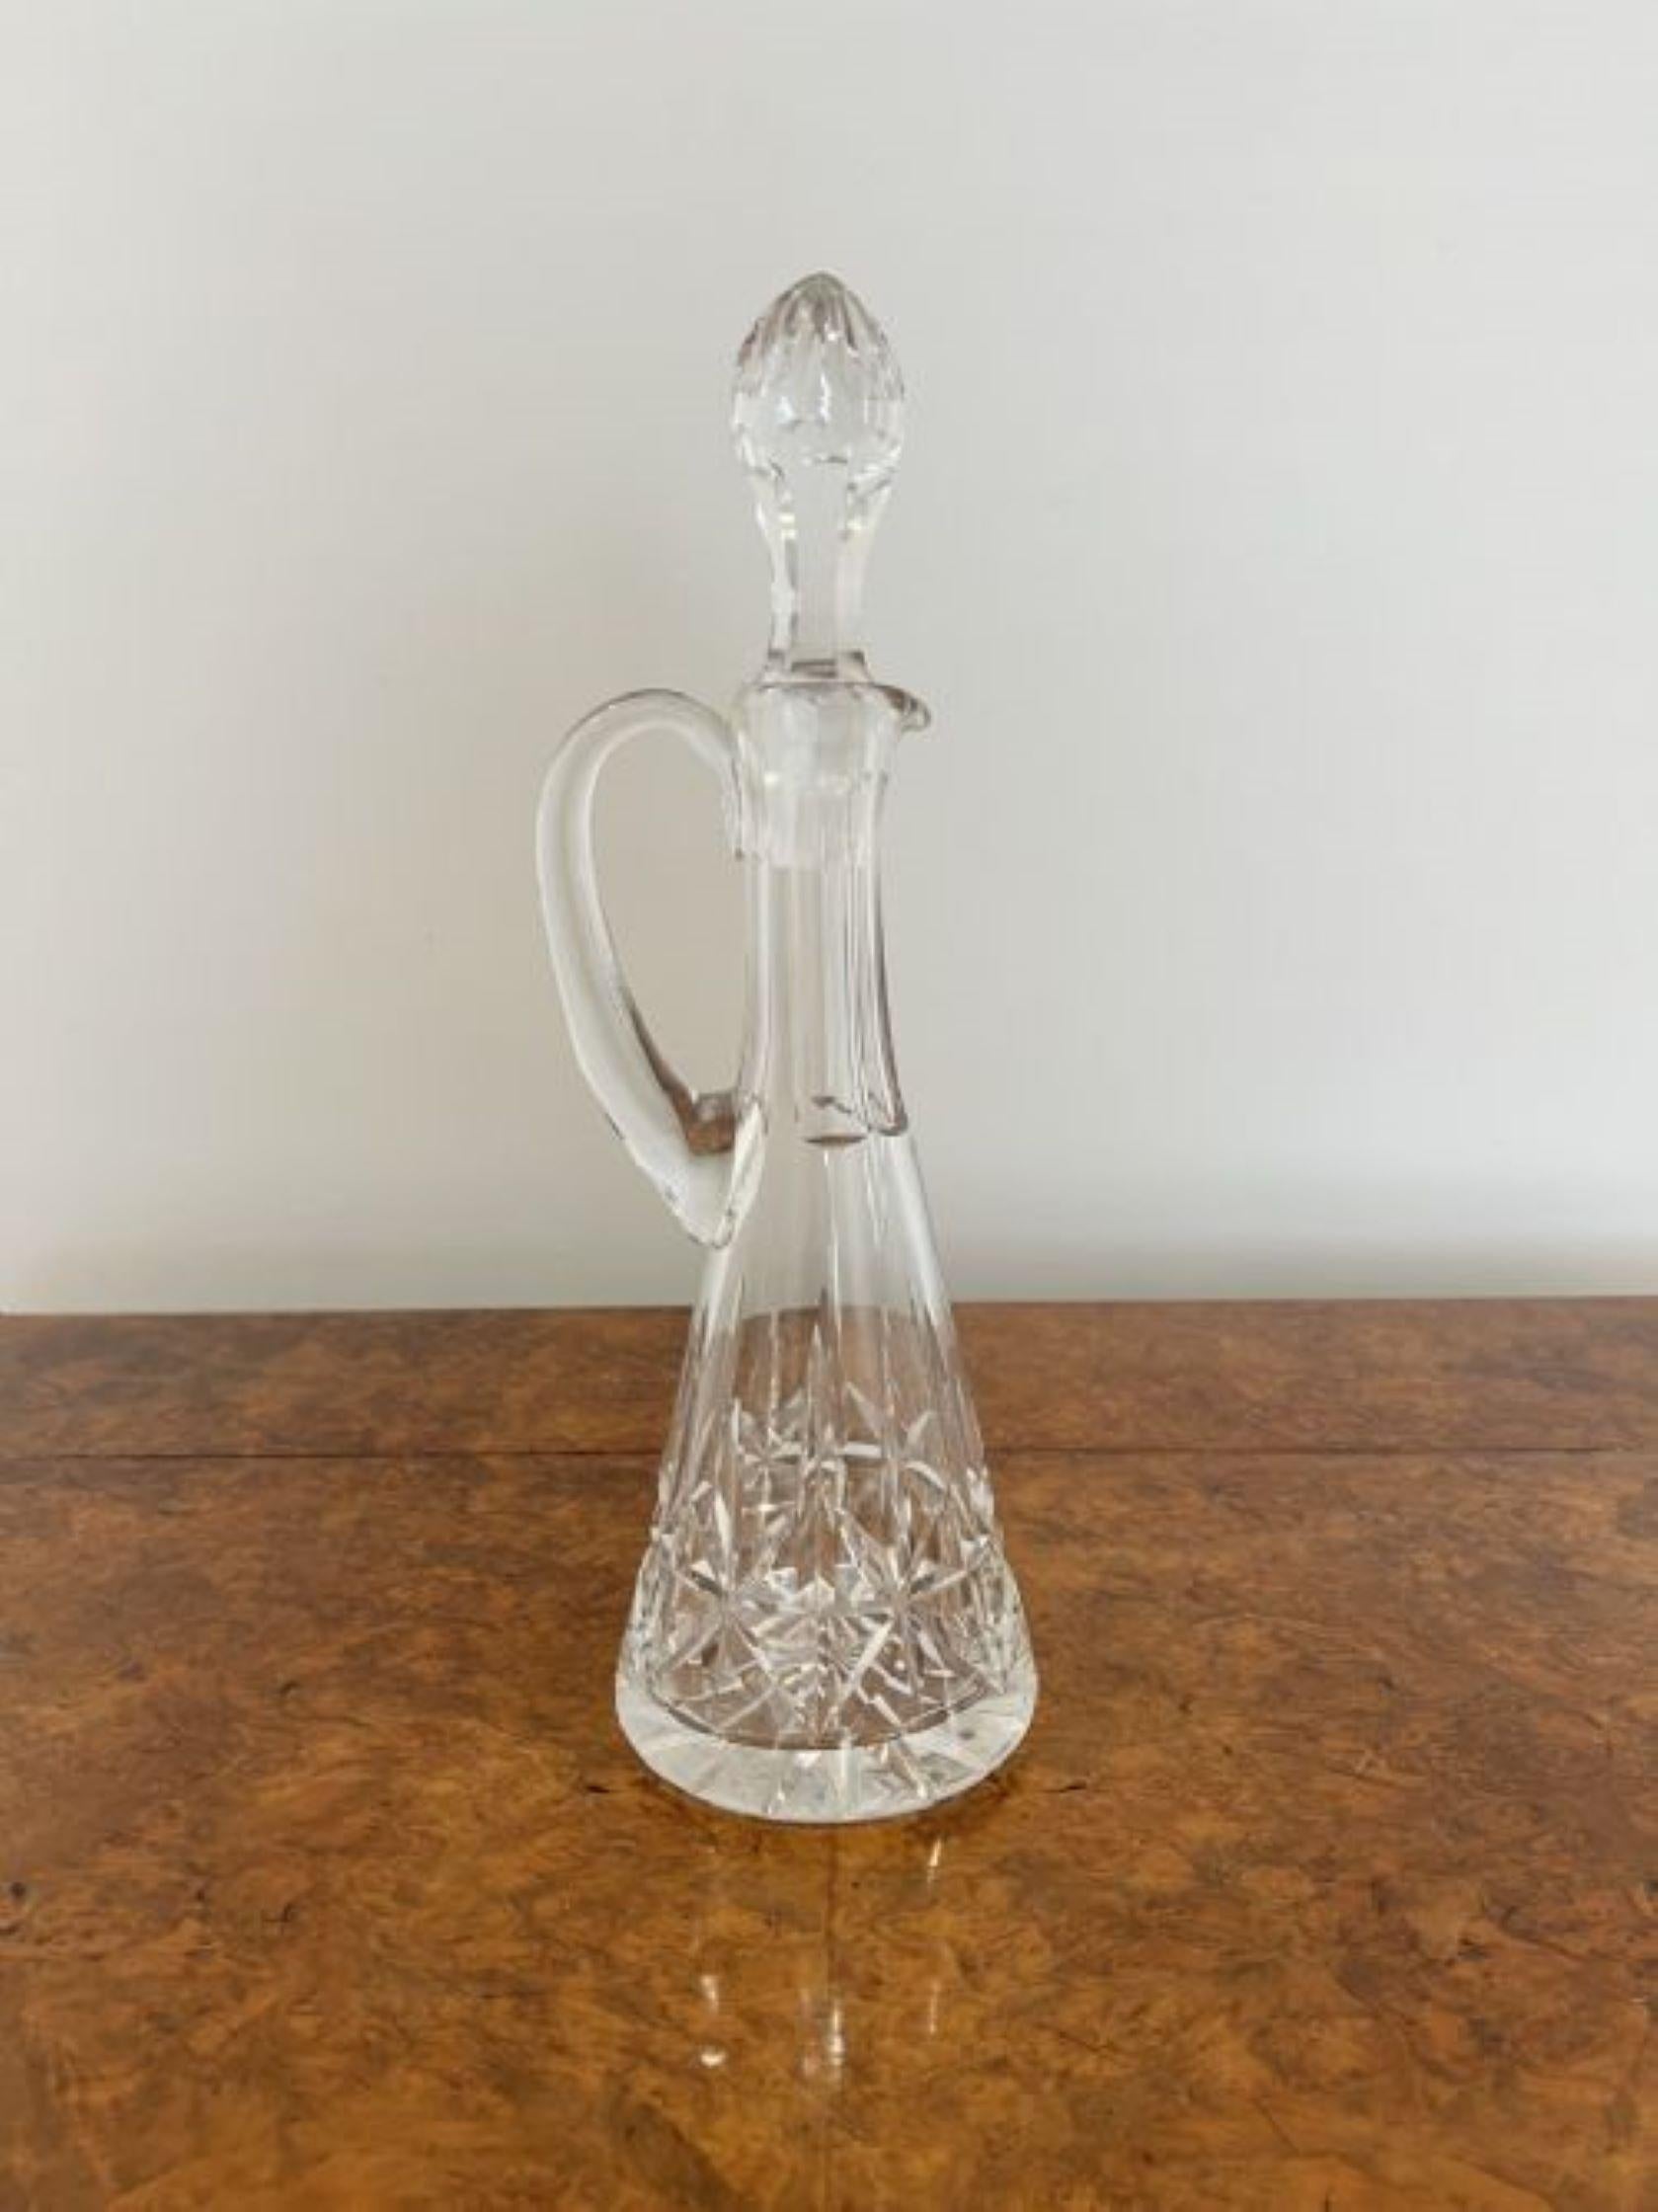 Quality antique Edwardian cut glass ewer having a quality antique Edwardian cut glass ewer with a shaped handle and a cut glass stopper Quality antique Edwardian cut glass ewer having a quality antique Edwardian cut glass ewer with a shaped handle